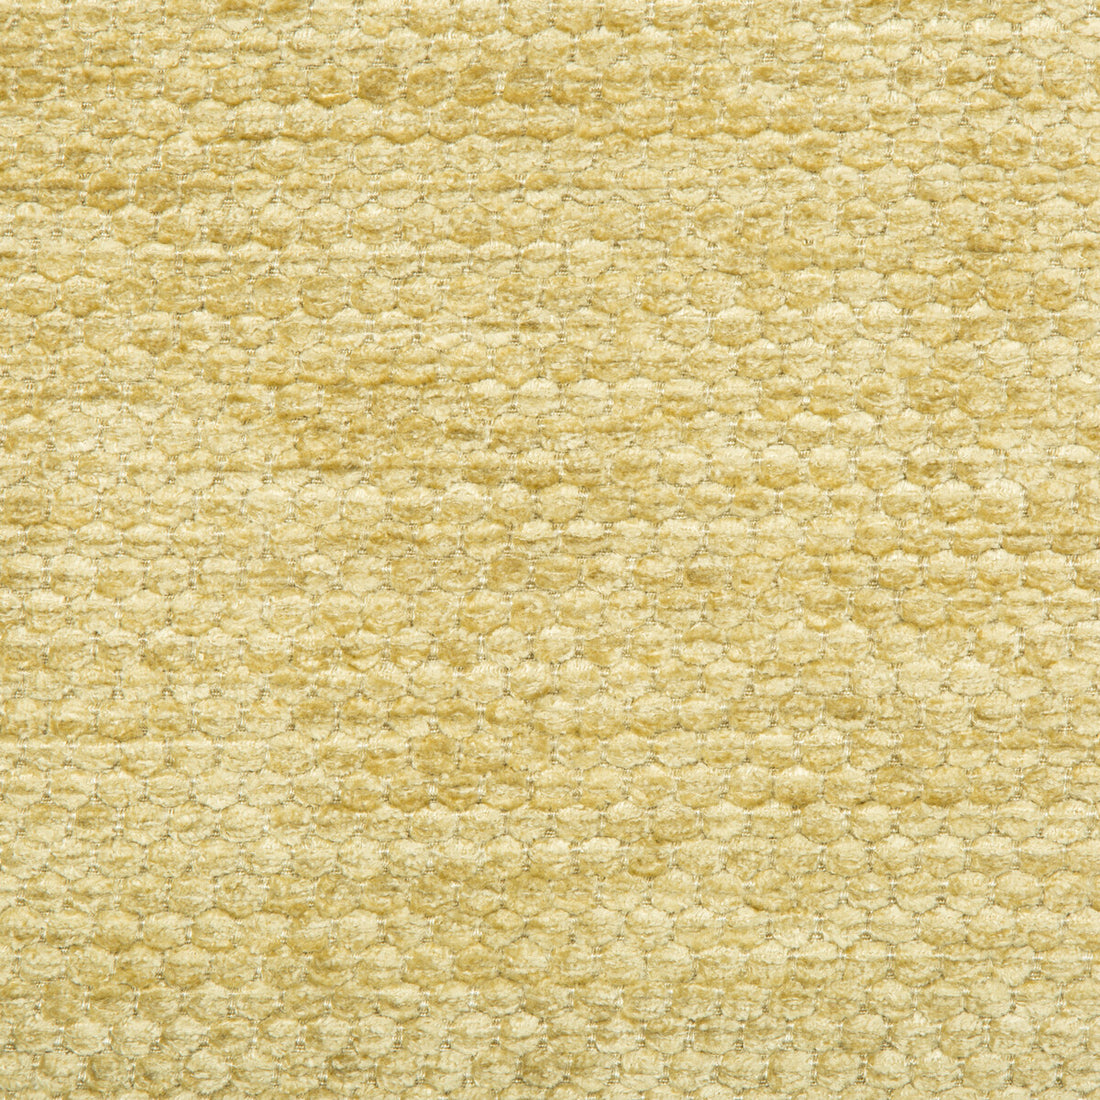 Lonsdale fabric in straw color - pattern 2016125.4.0 - by Lee Jofa in the Furness Weaves collection